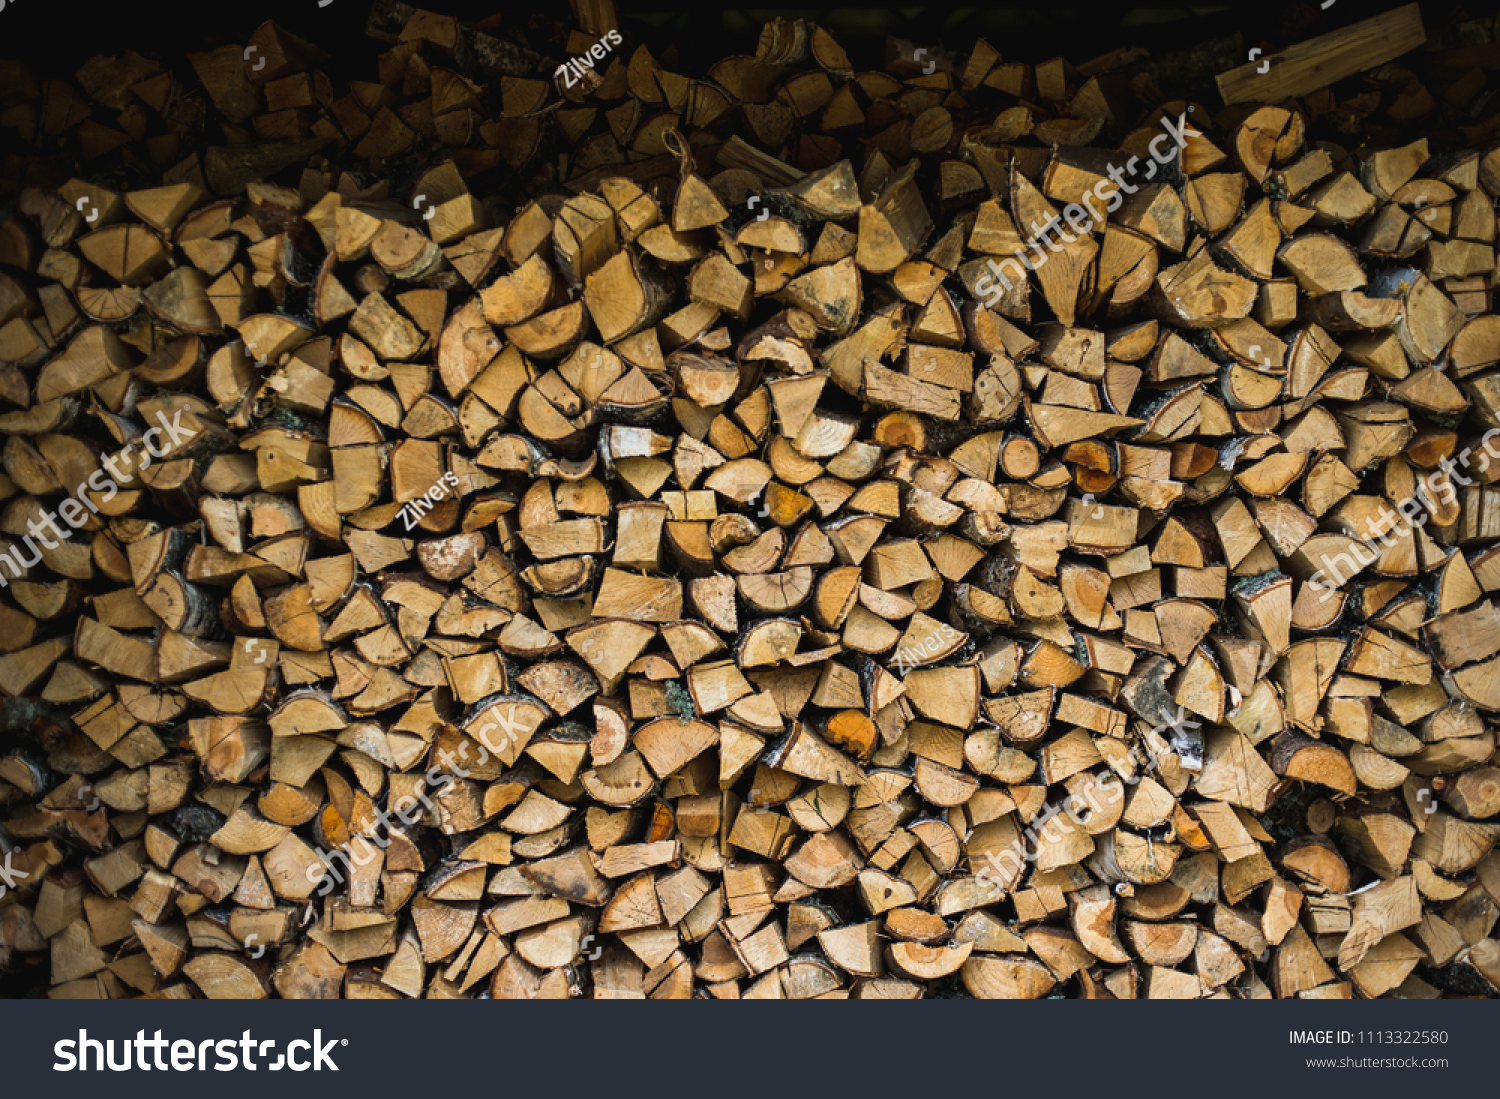 Wooden background. Firewood for the winter, stacks of firewood #1113322580